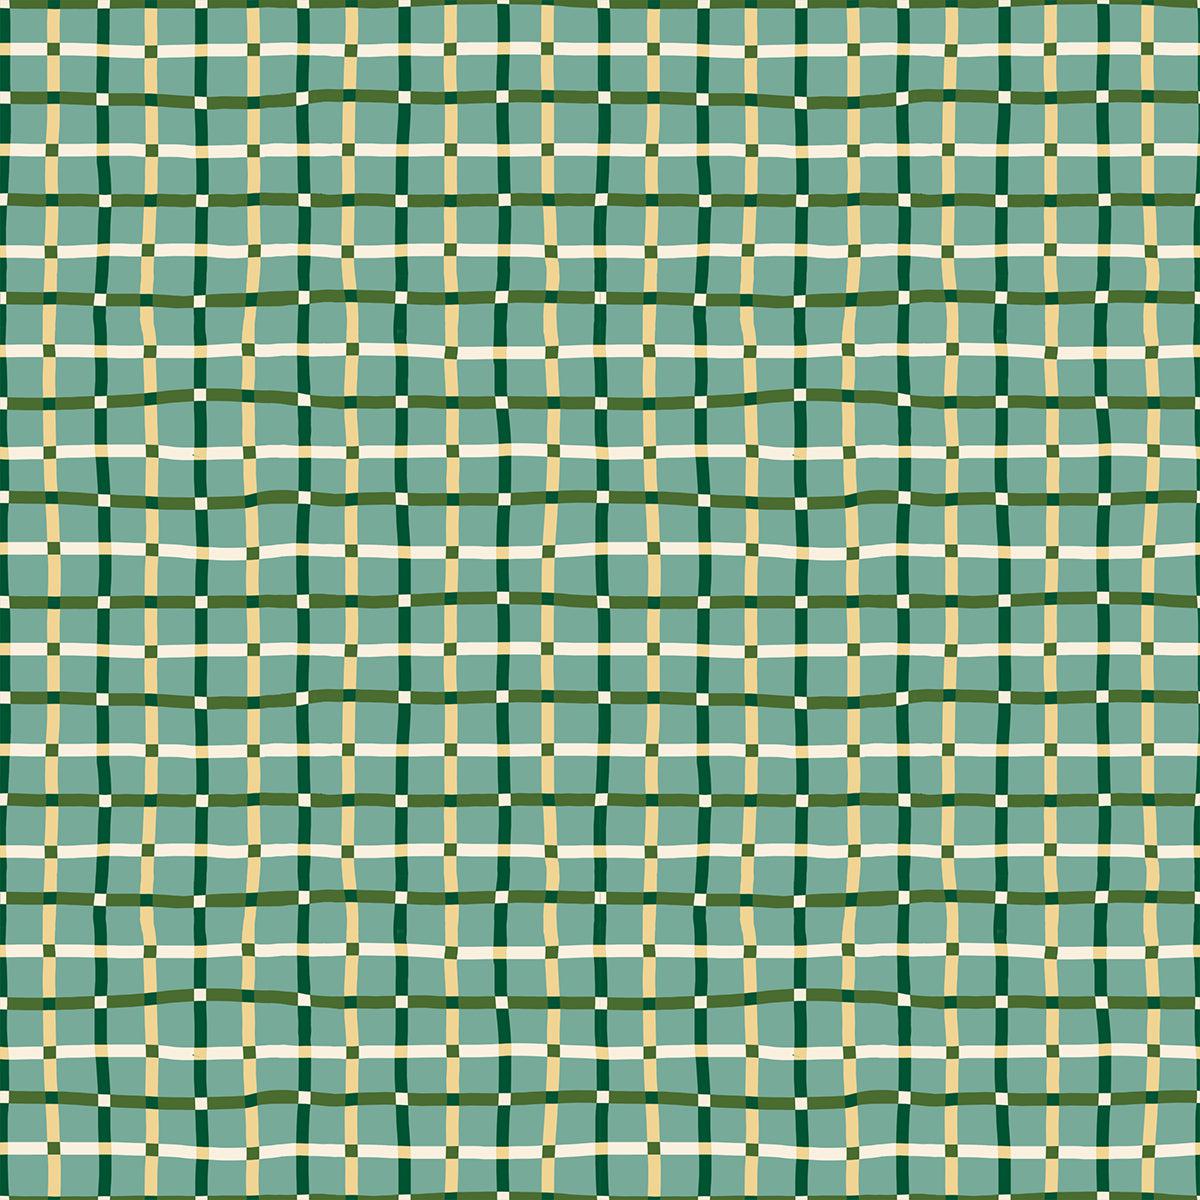 Ruby Star Society-Trellis Watercress-fabric-gather here online